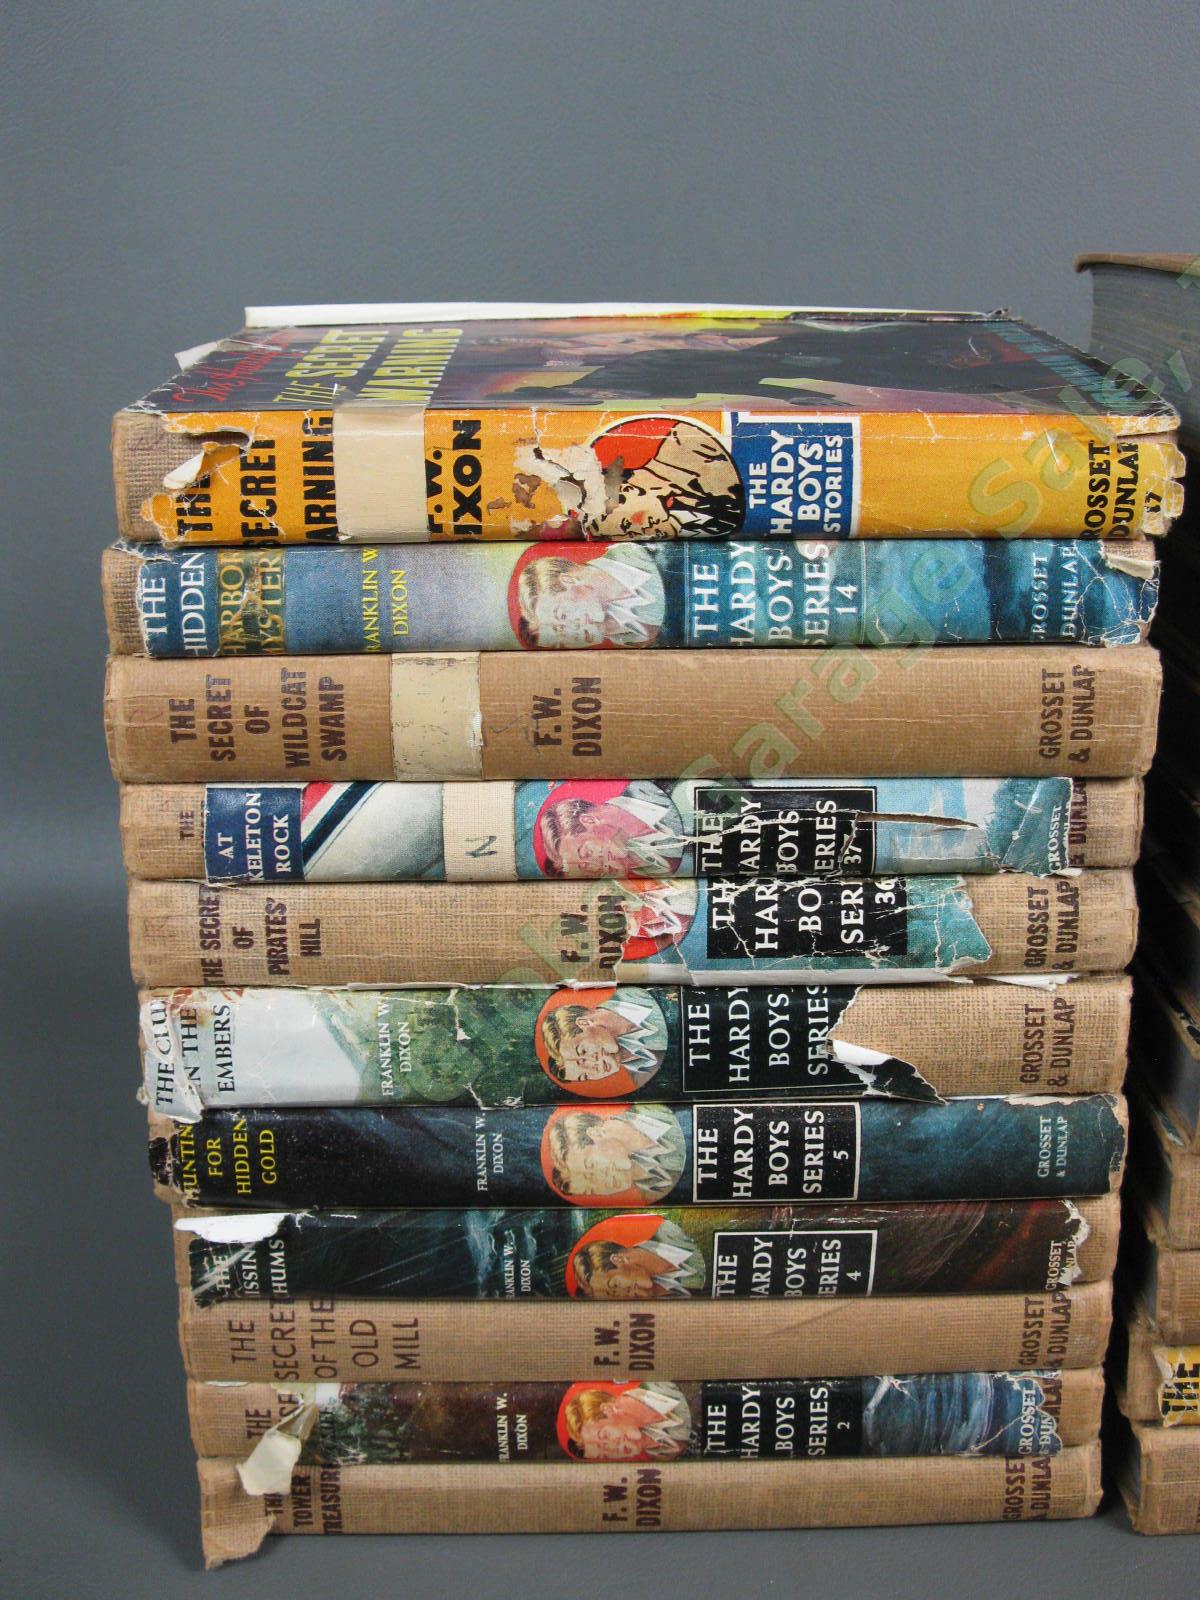 22 VINTAGE Hardy Boys Mystery Brown Hardcover Book Collection Set 1931-1960s LOT 1